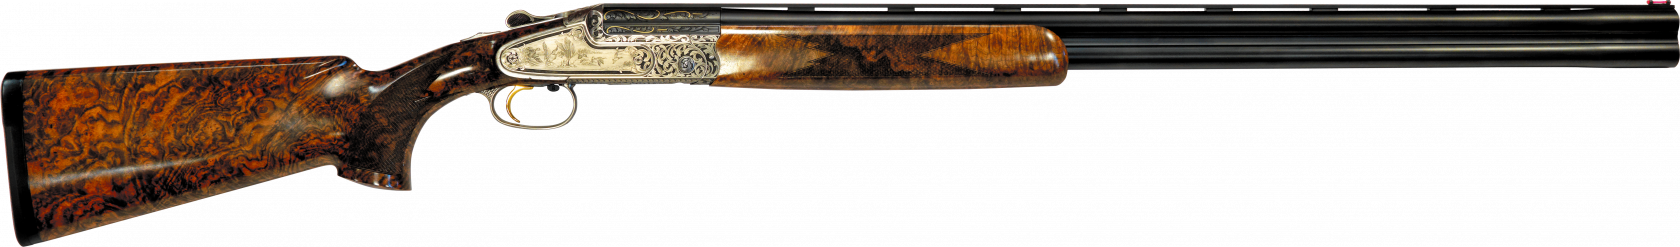 Blaser+F3+Competition+Imperial+12-76-810+1+_2.png